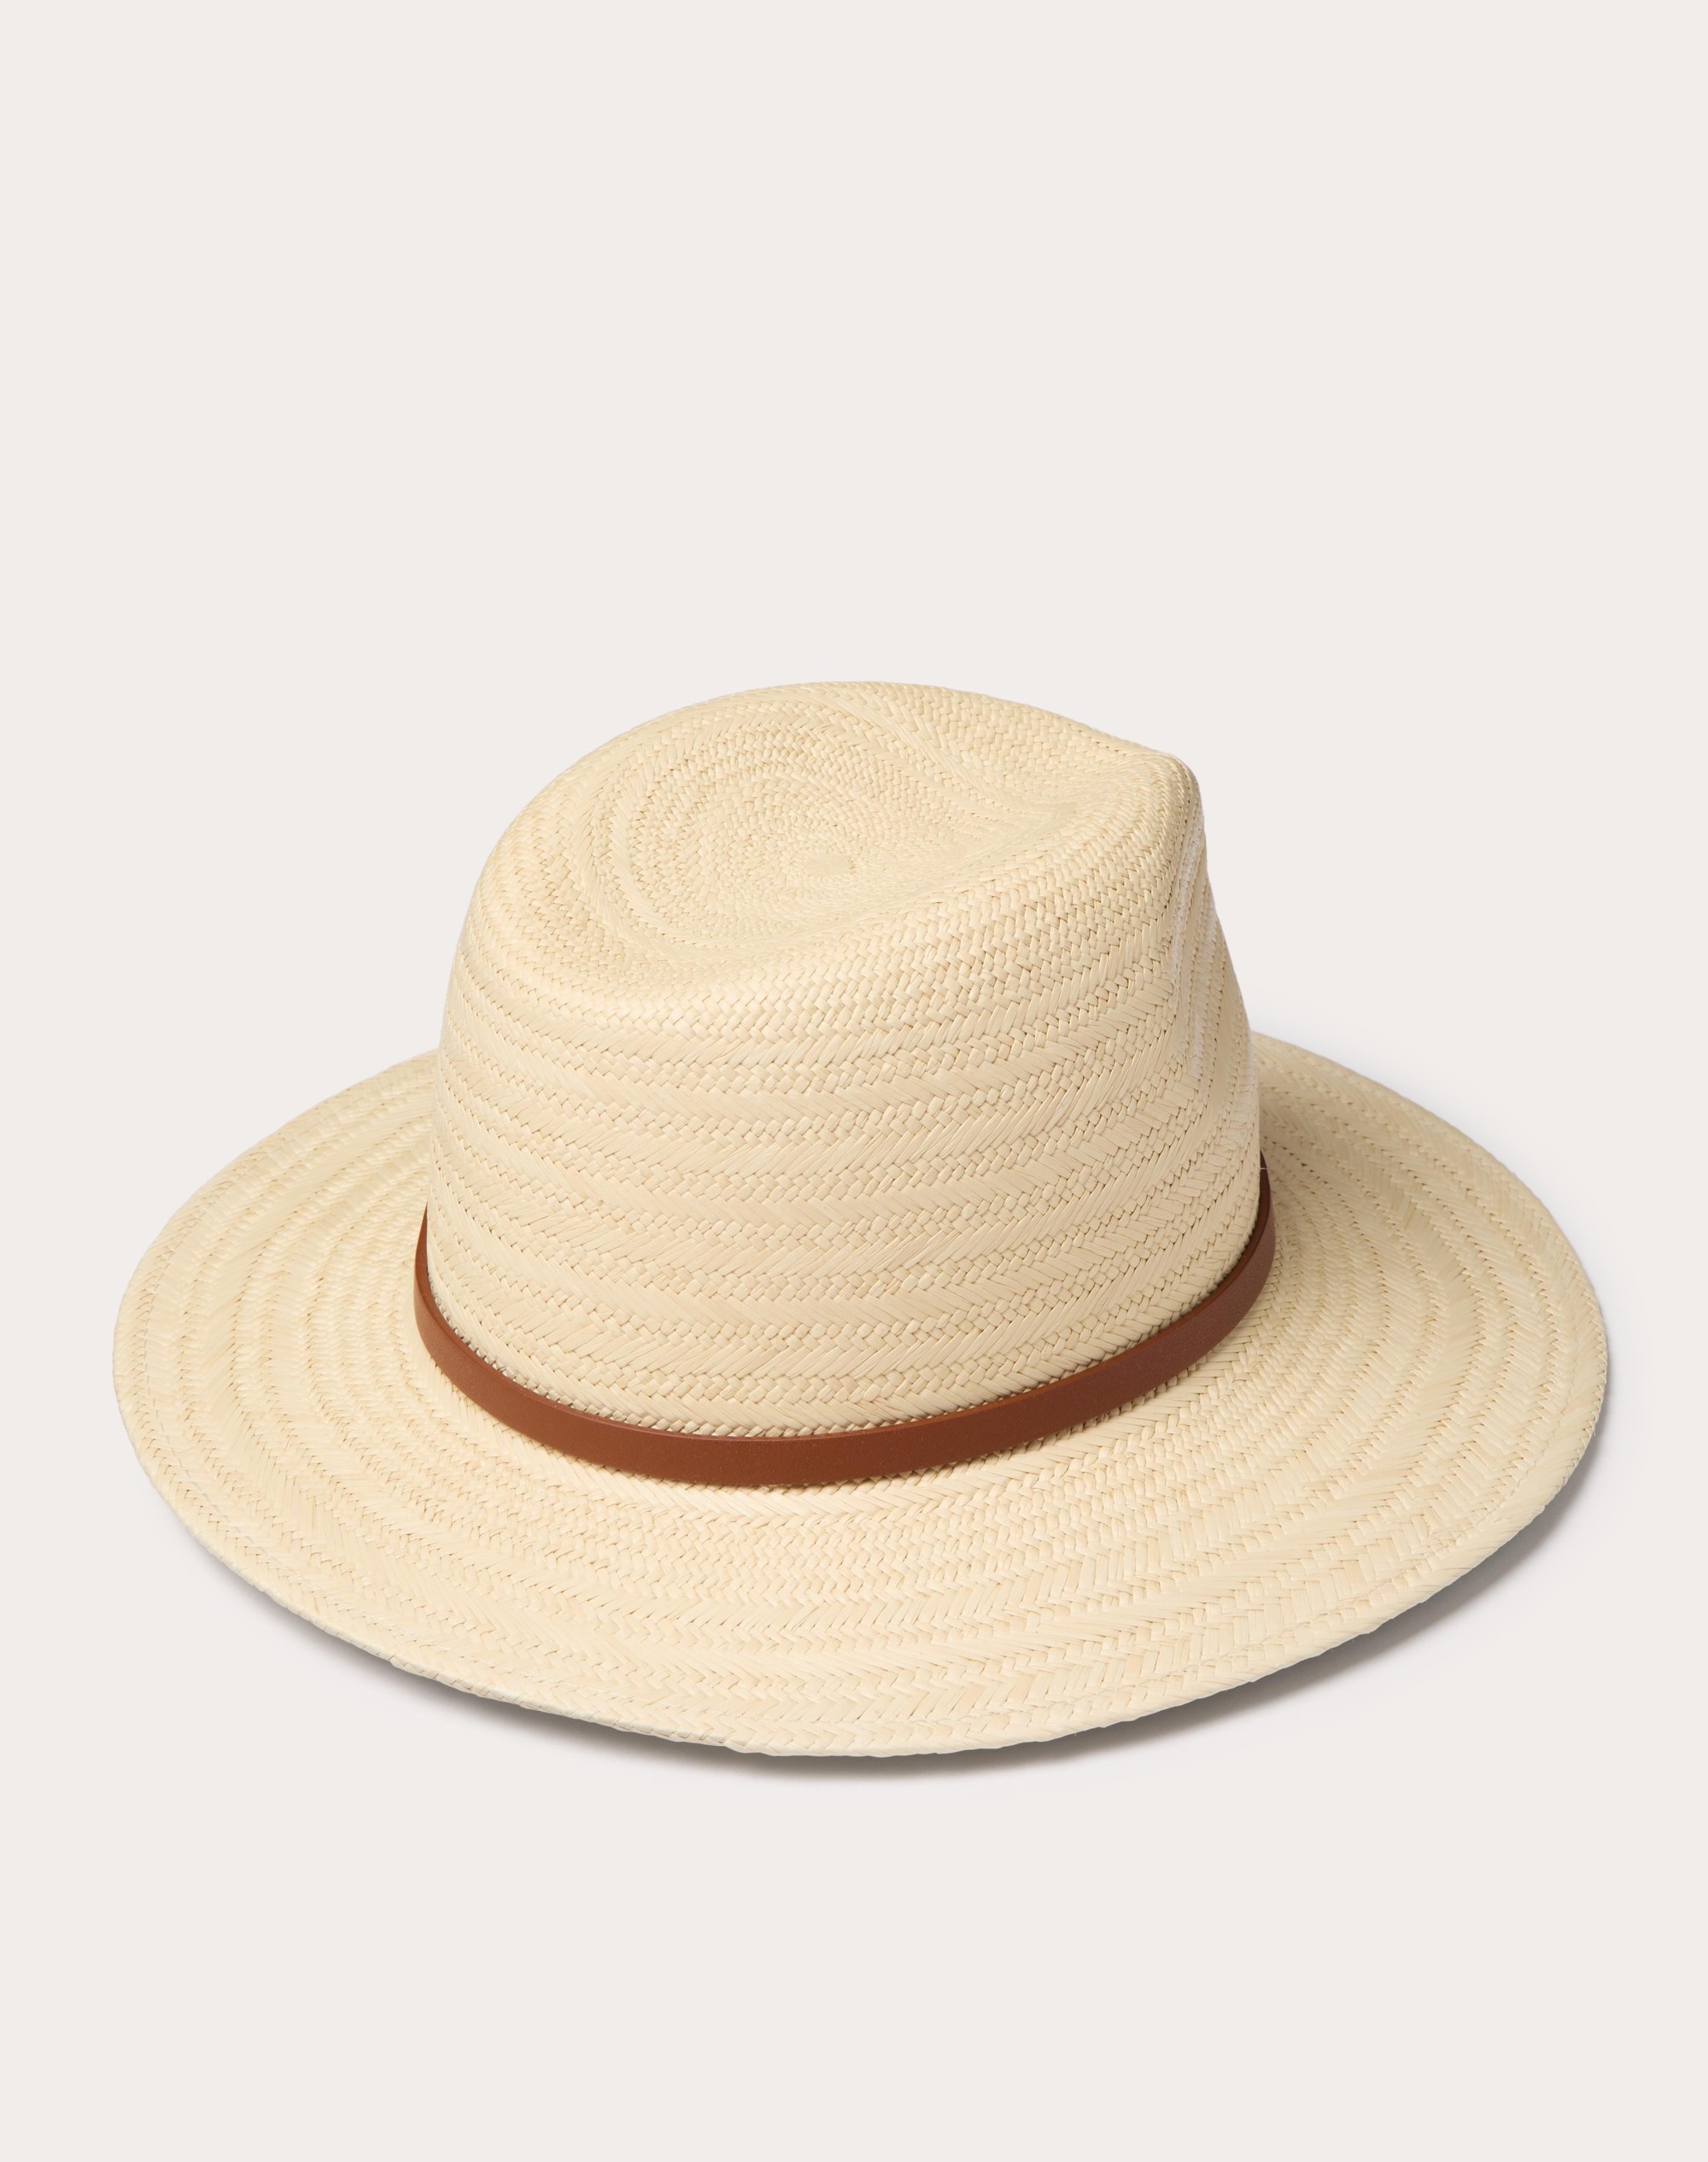 THE BOLD EDITION VLOGO WOVEN PANAMA FEDORA HAT WITH METAL DETAIL - 3